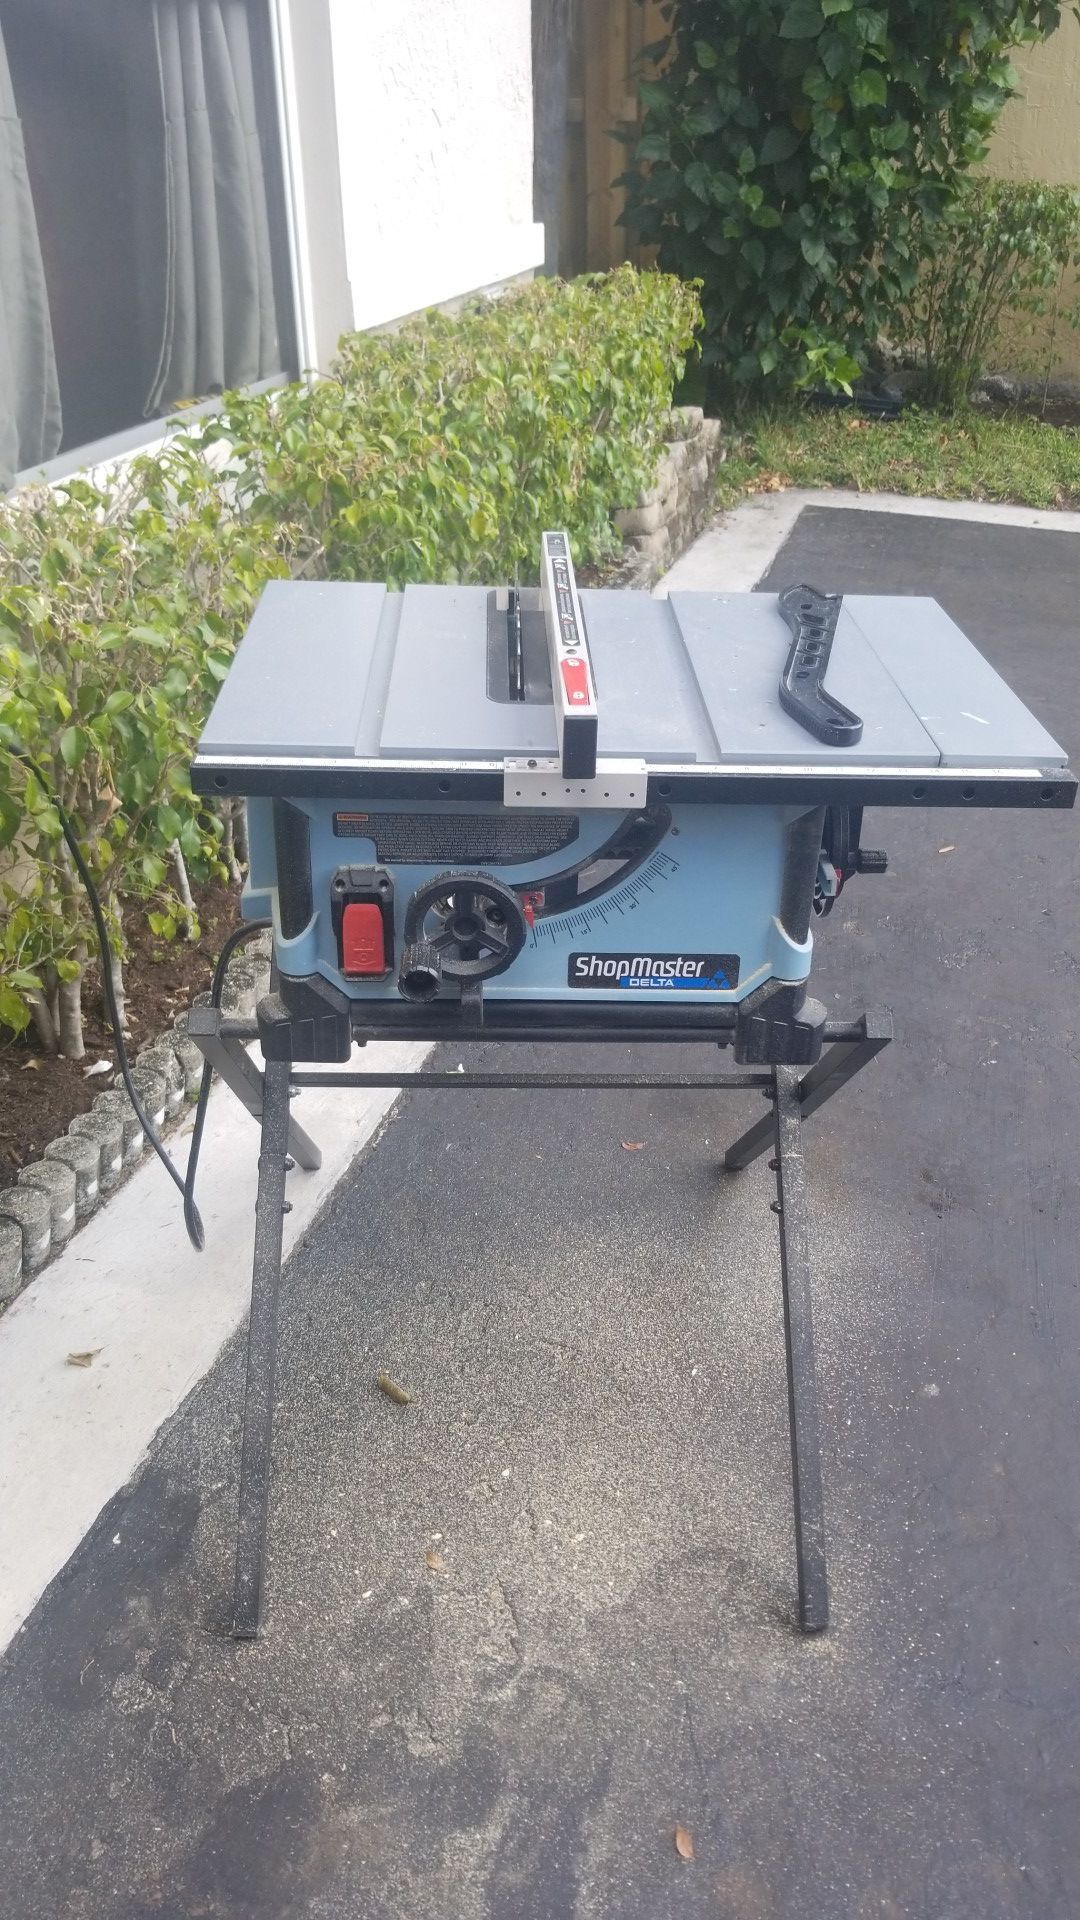 Delta Shop Master 10 inch table saw